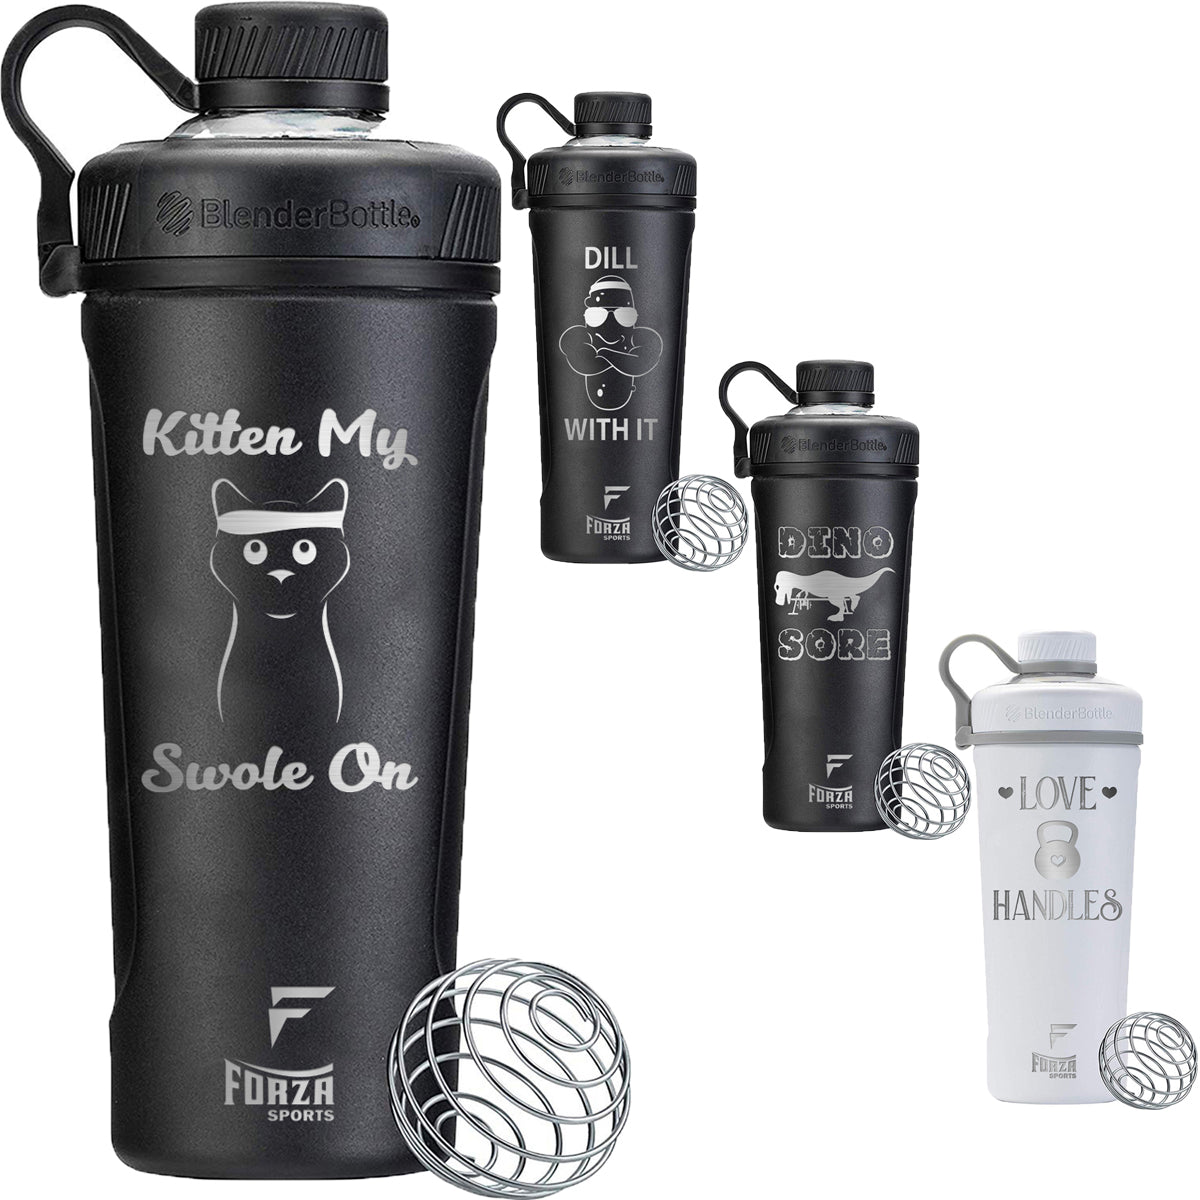 Blender Bottle x Forza Sports Radian 26 oz. Insulated Stainless Steel Shaker Cup Forza Sports